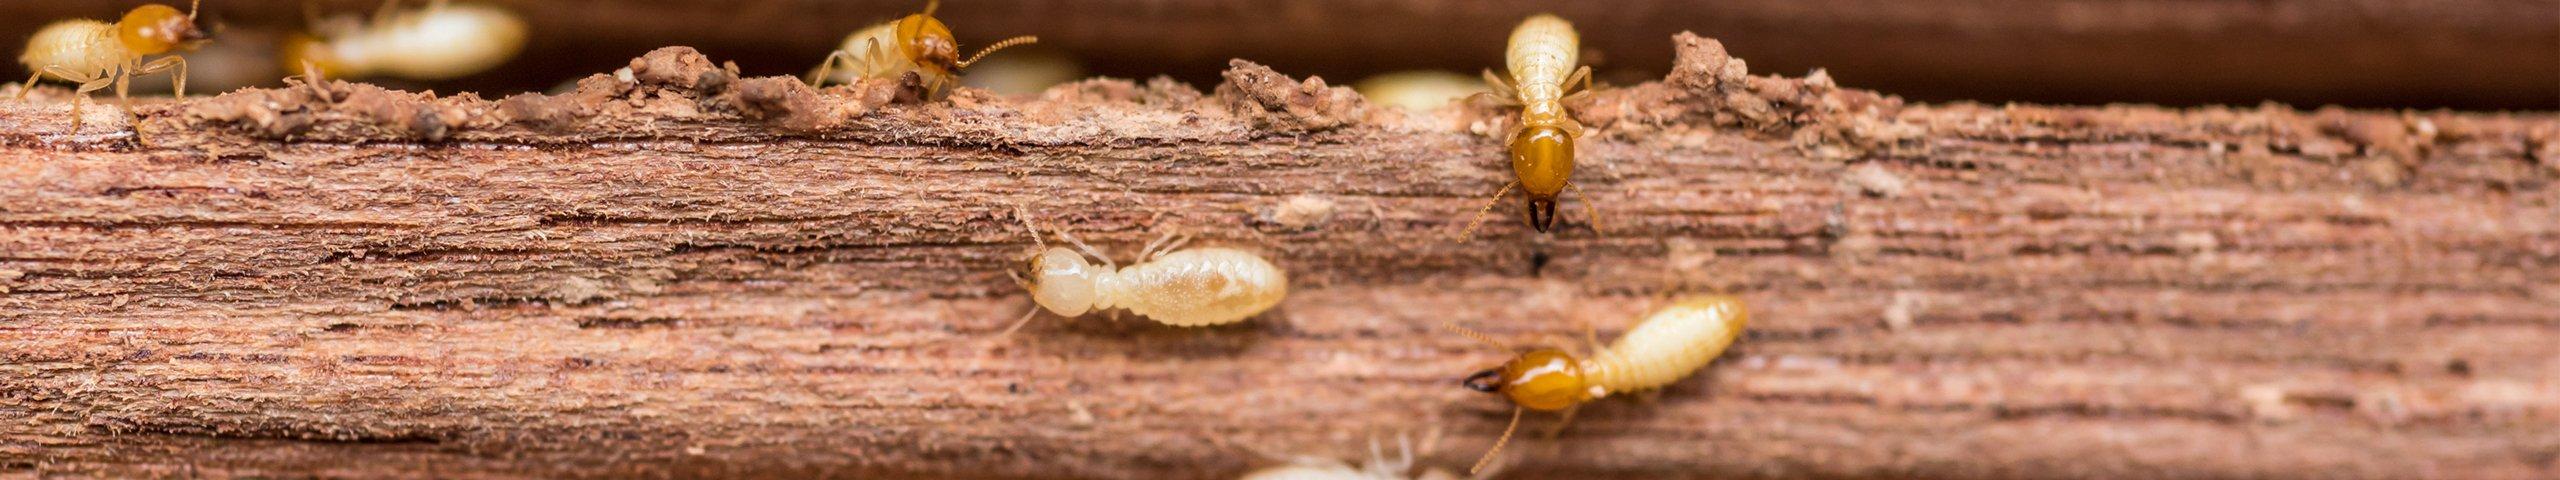 a group of termites on a piece of wood